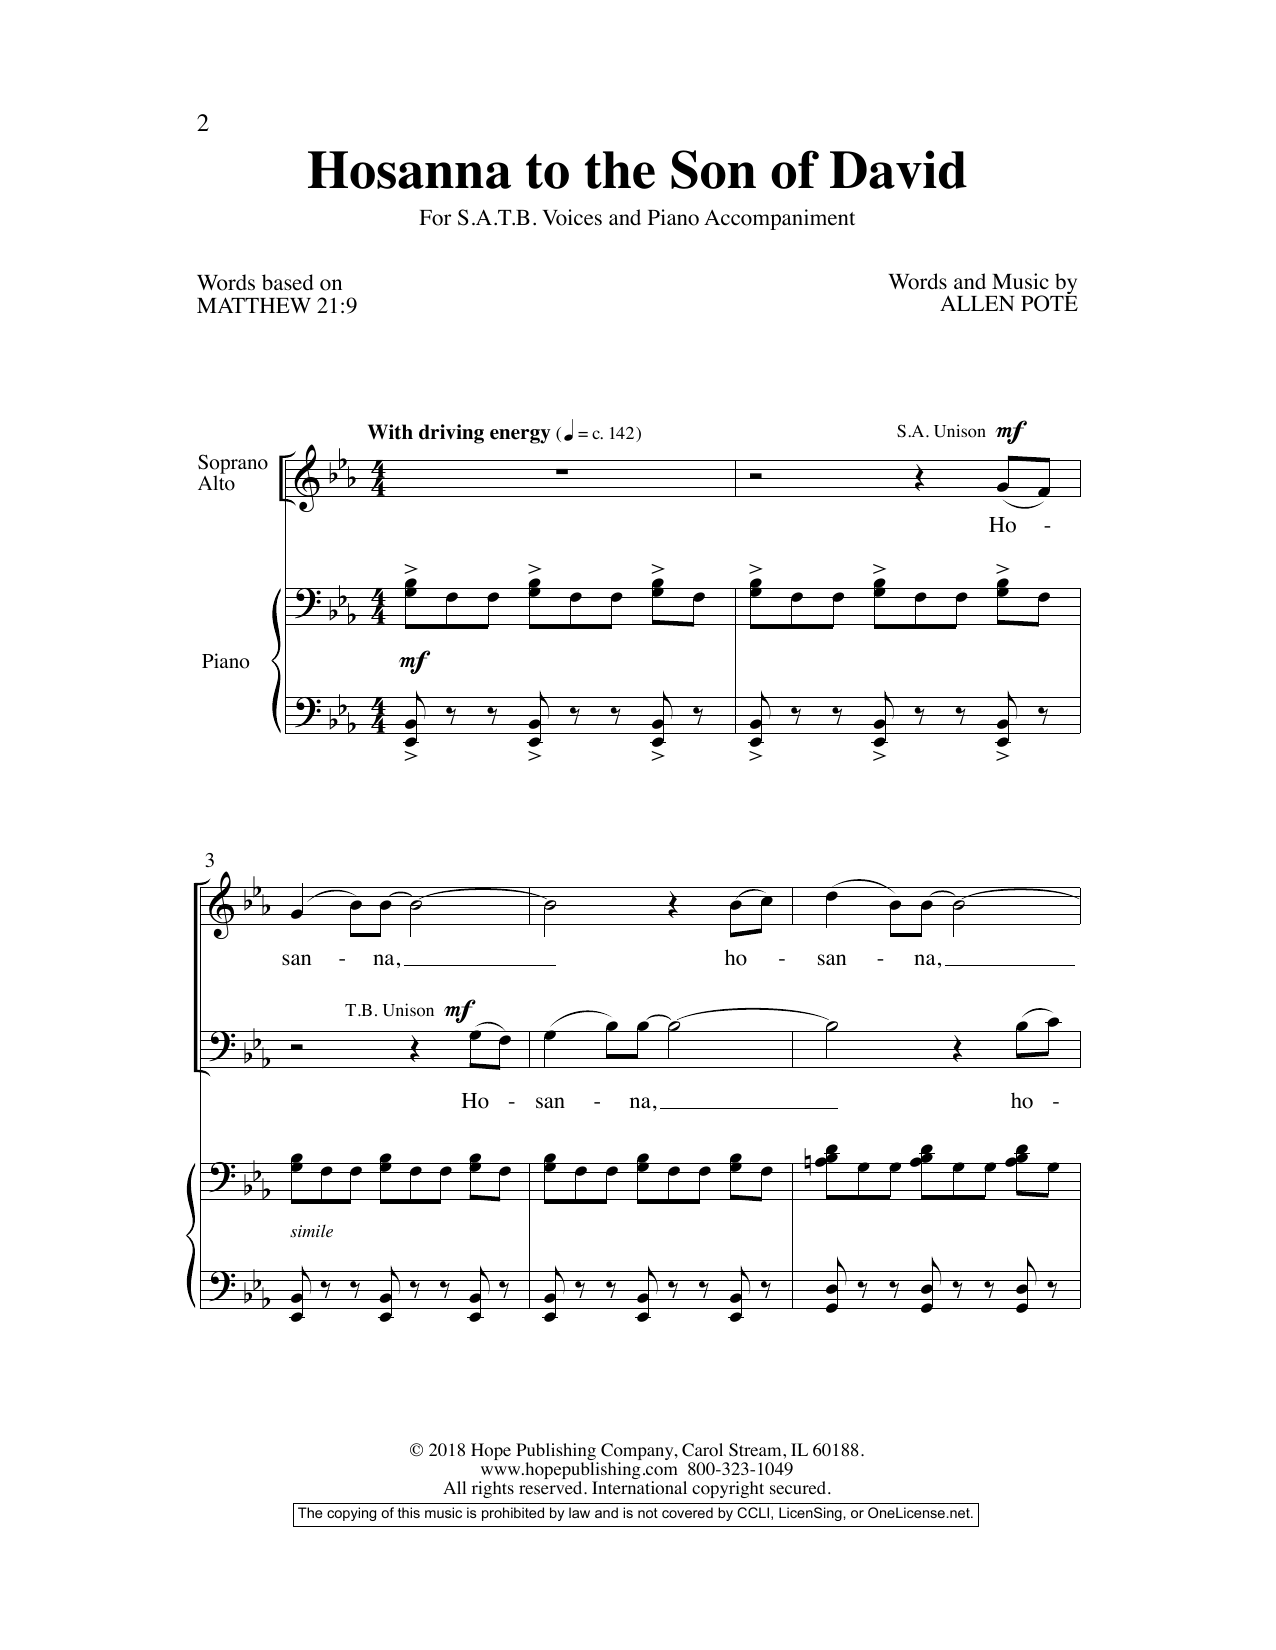 Download Allen Pote Hosanna To The Son Of David Sheet Music